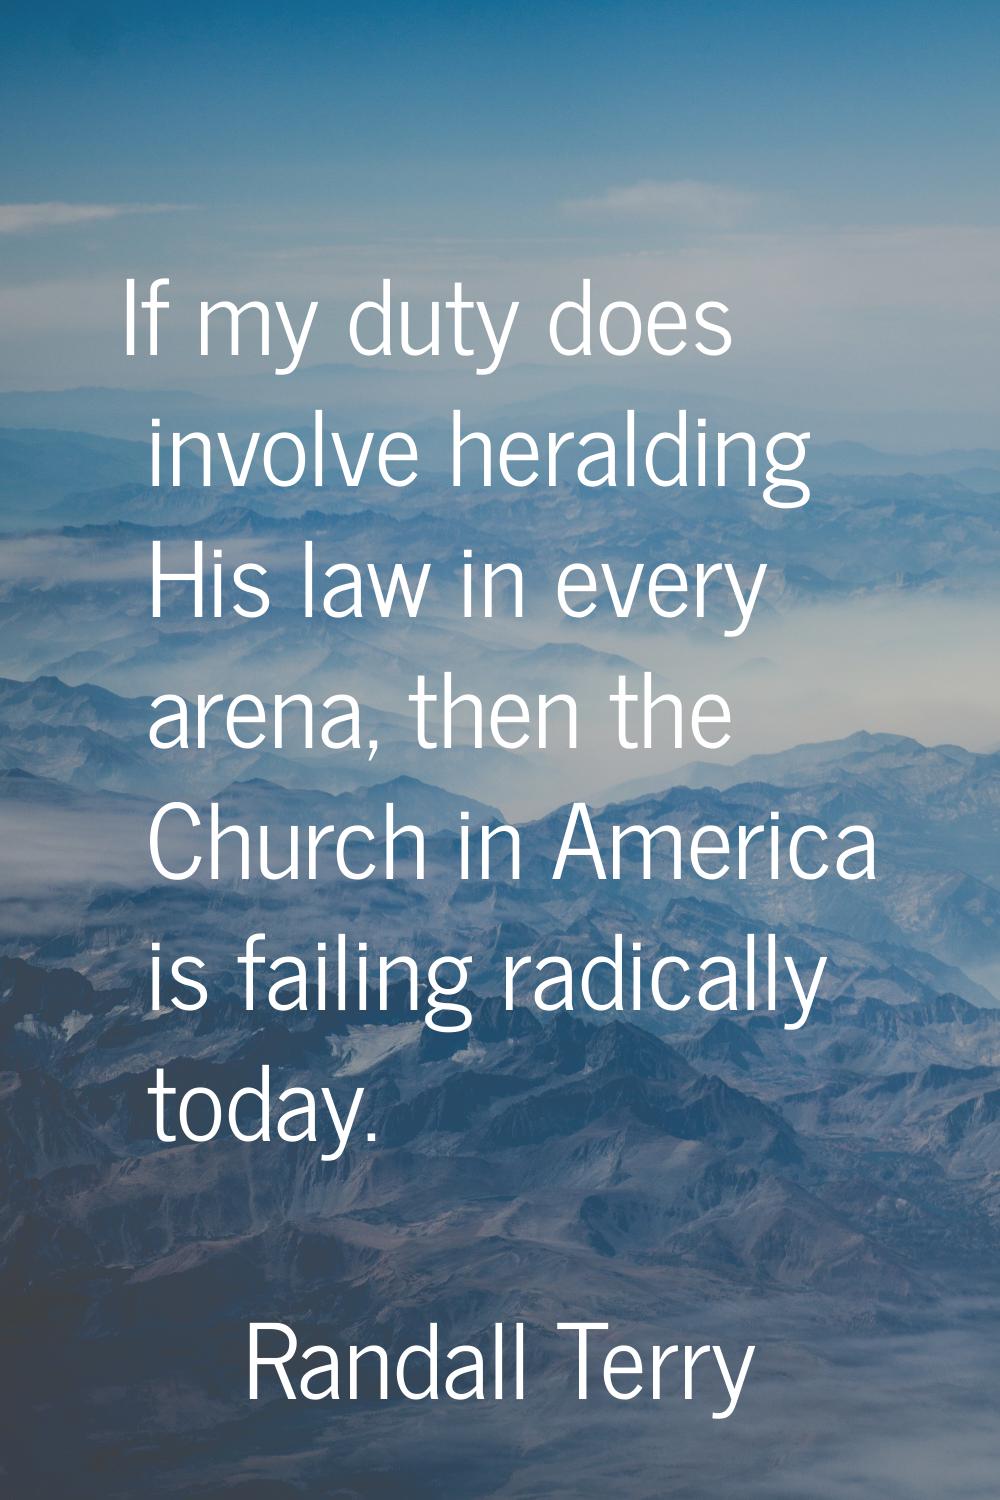 If my duty does involve heralding His law in every arena, then the Church in America is failing rad